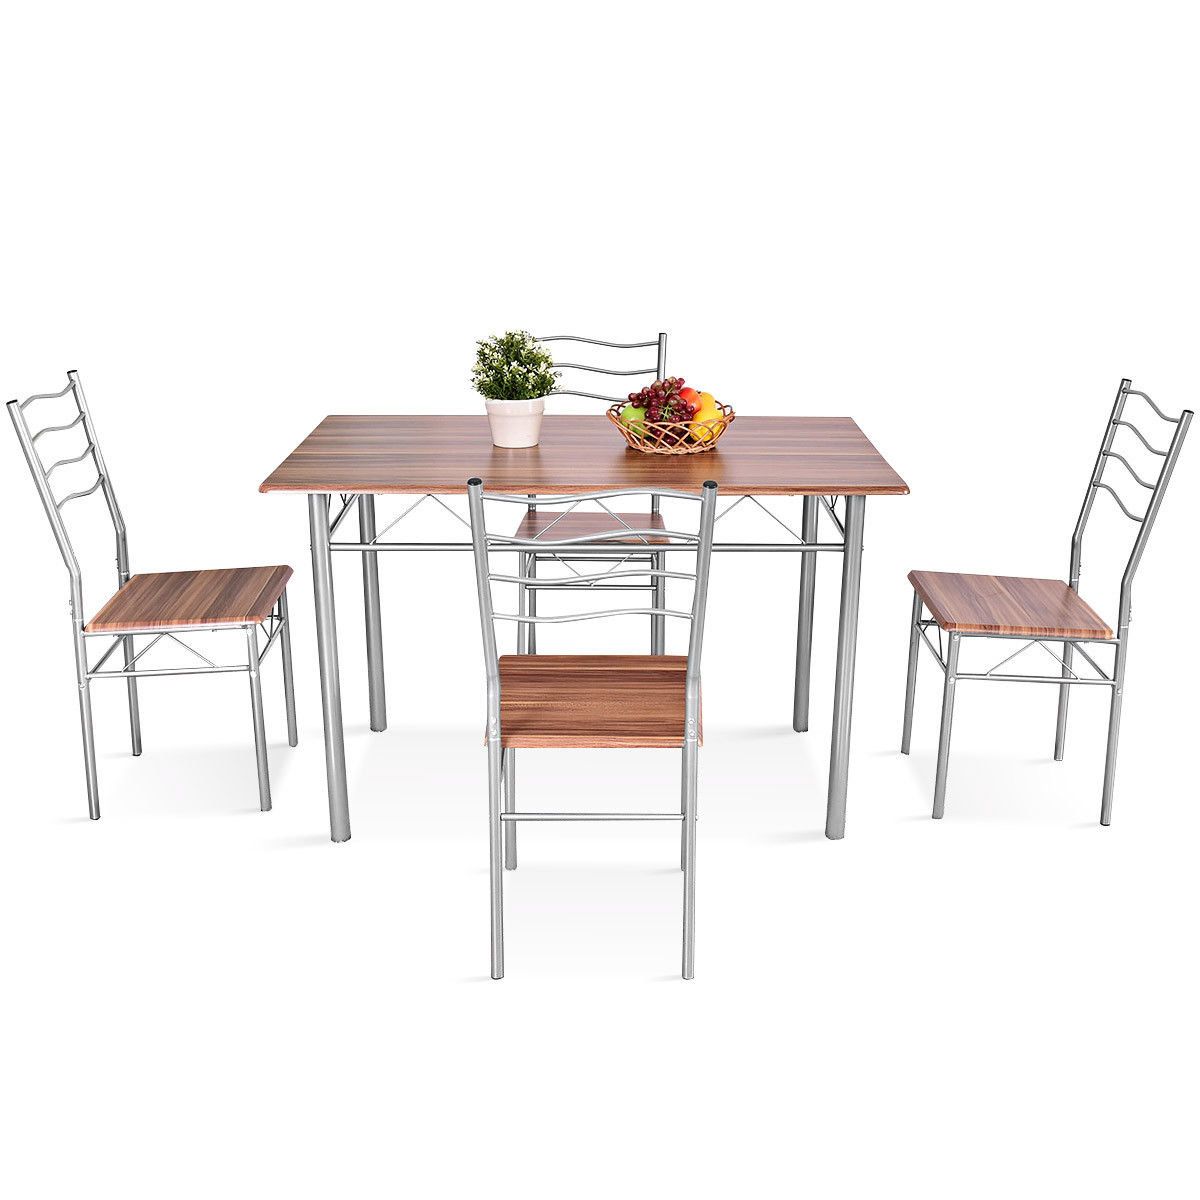 Ebay In Most Up To Date Taulbee 5 Piece Dining Sets (View 11 of 20)